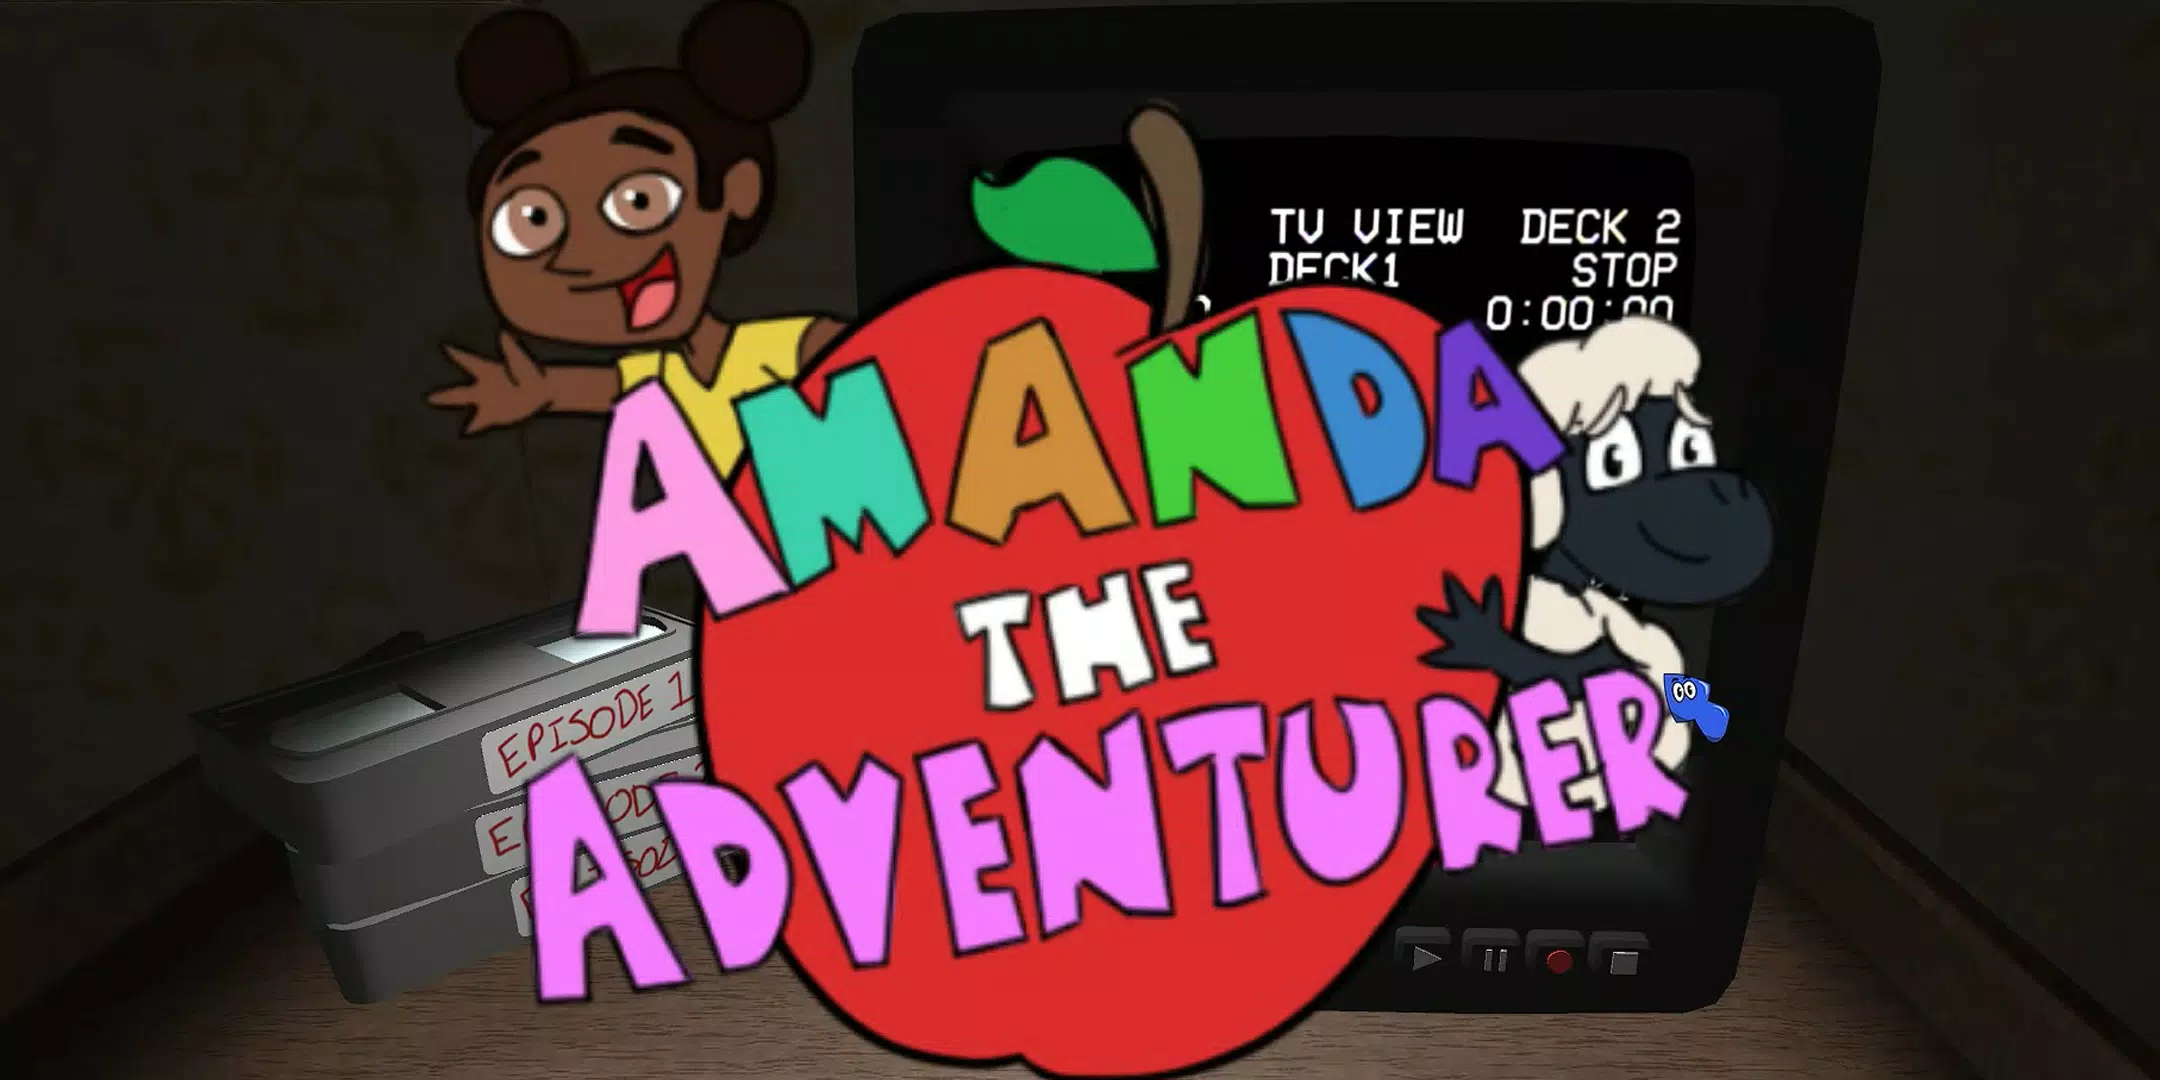 Download Amanda The Adventurer android on PC